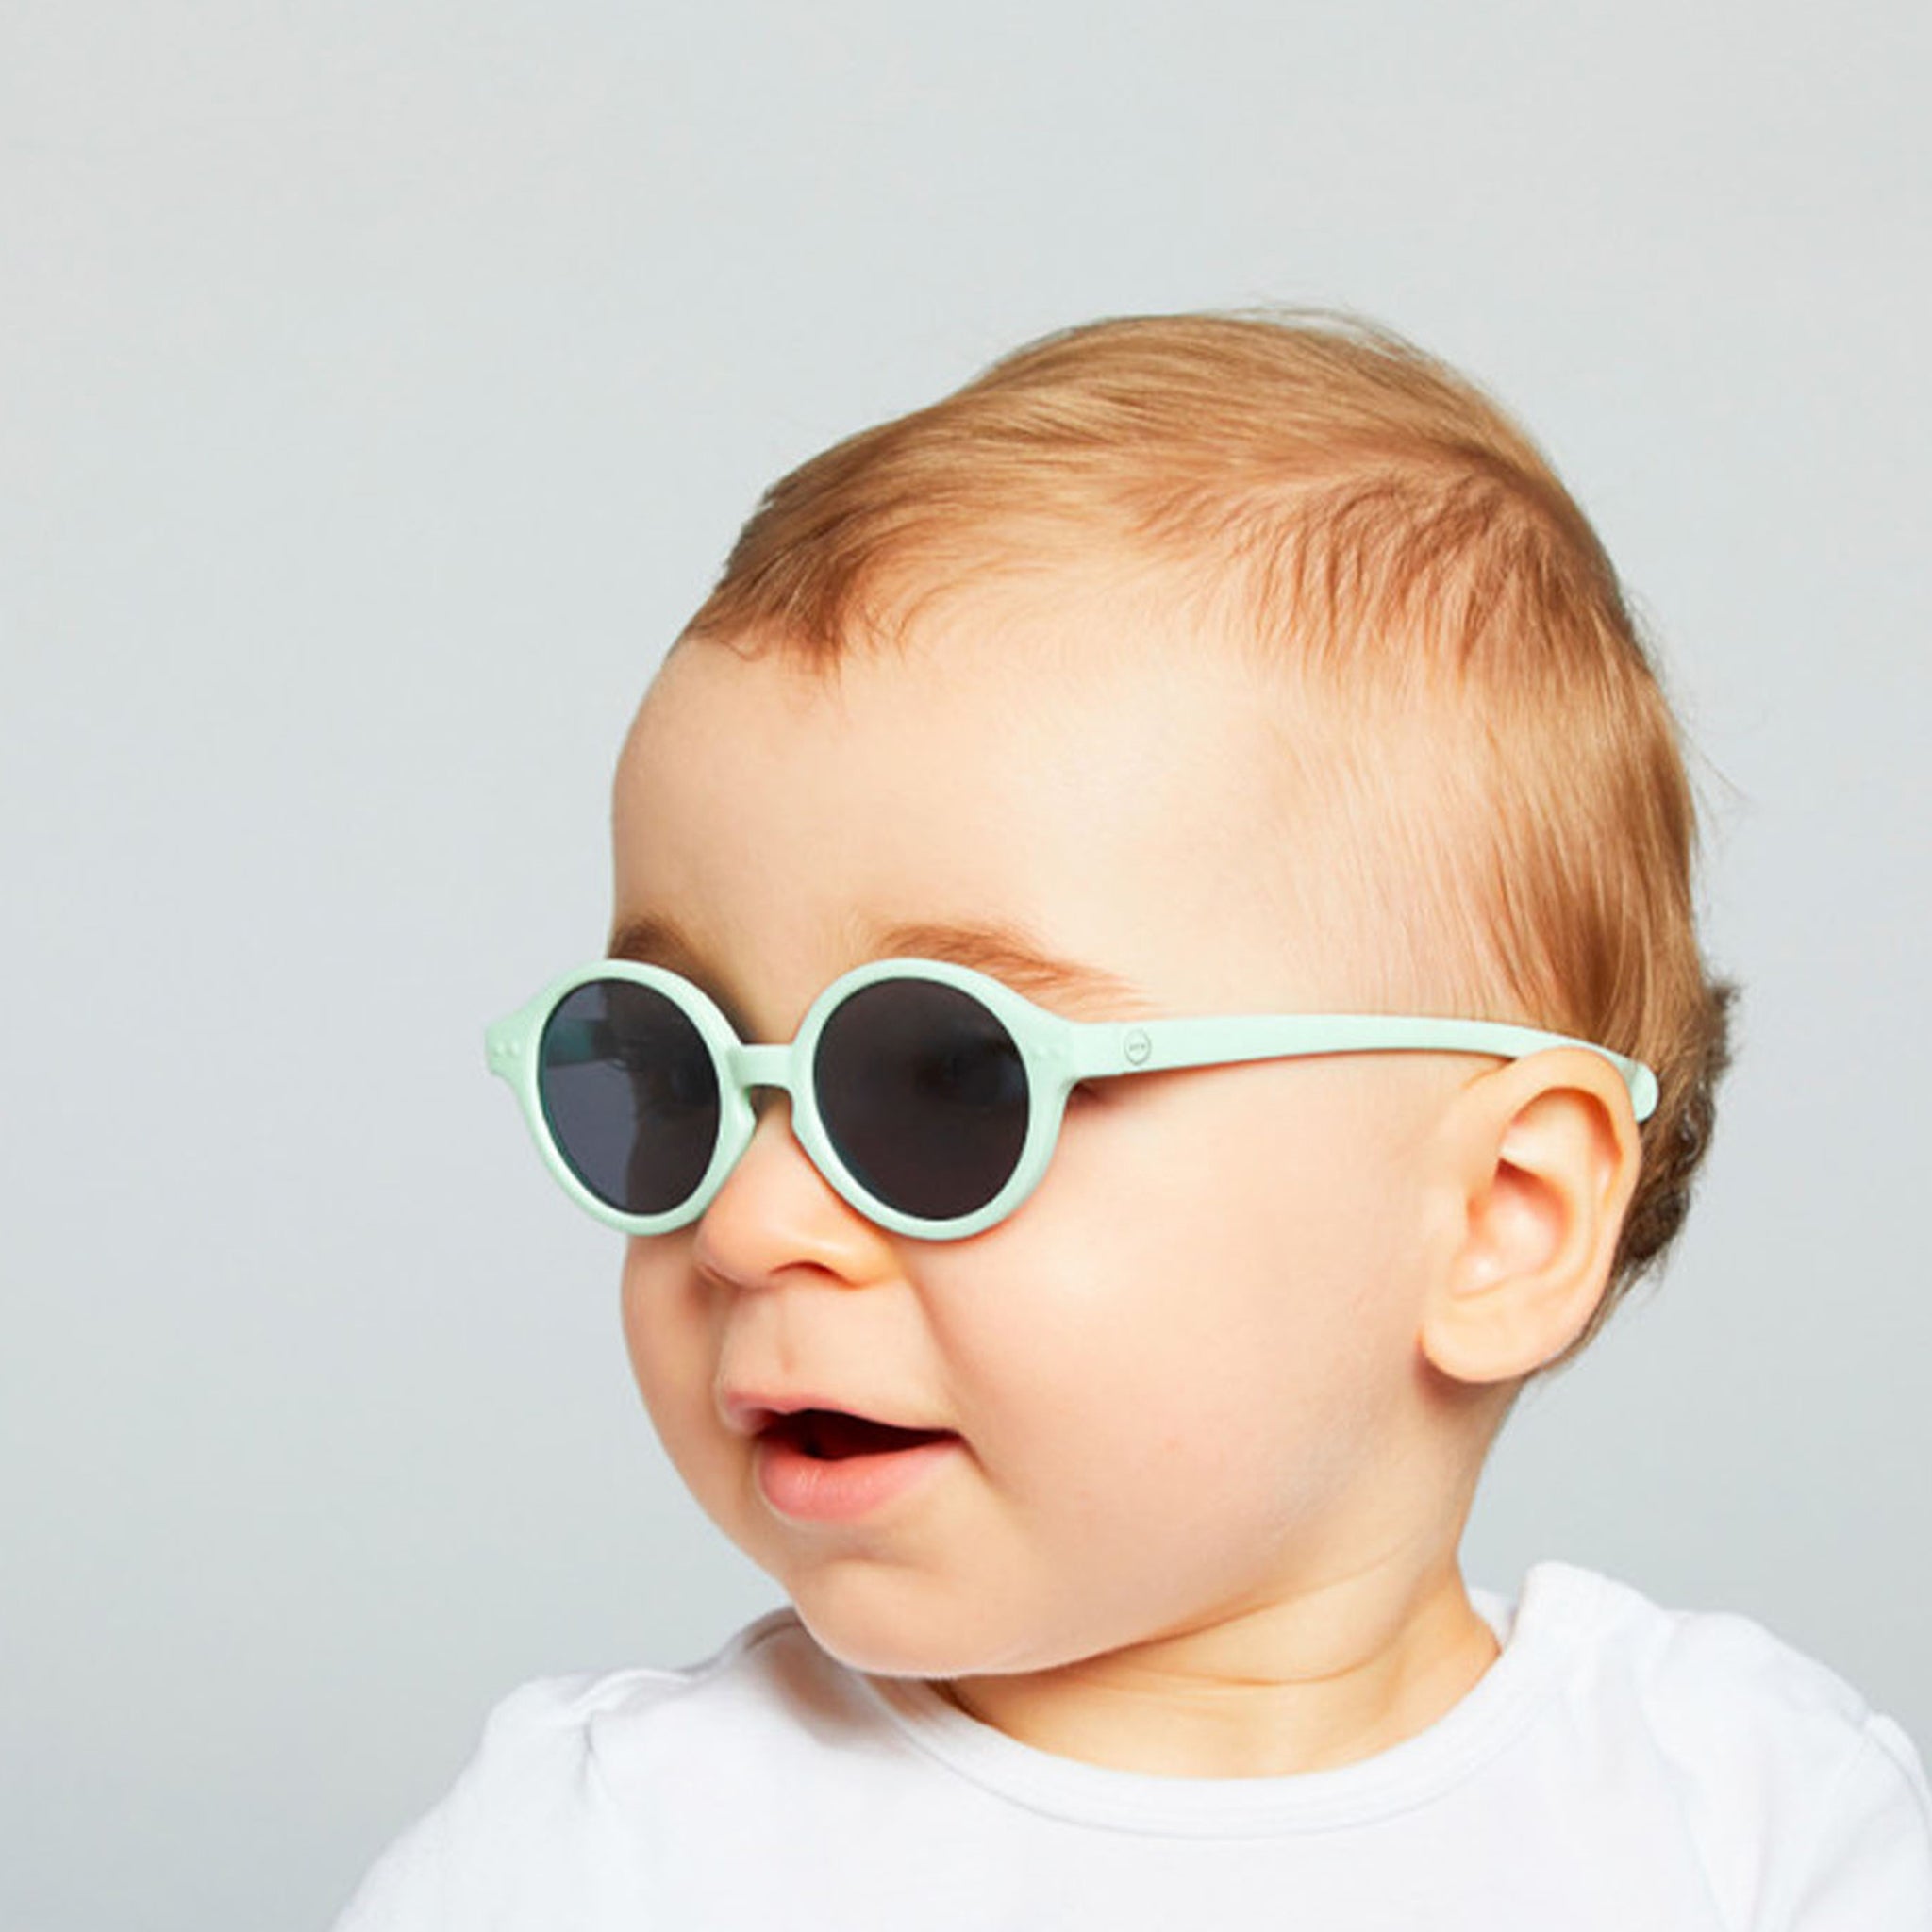 Baby wearing sky blue sunnies looking towards left off screen with grey background 